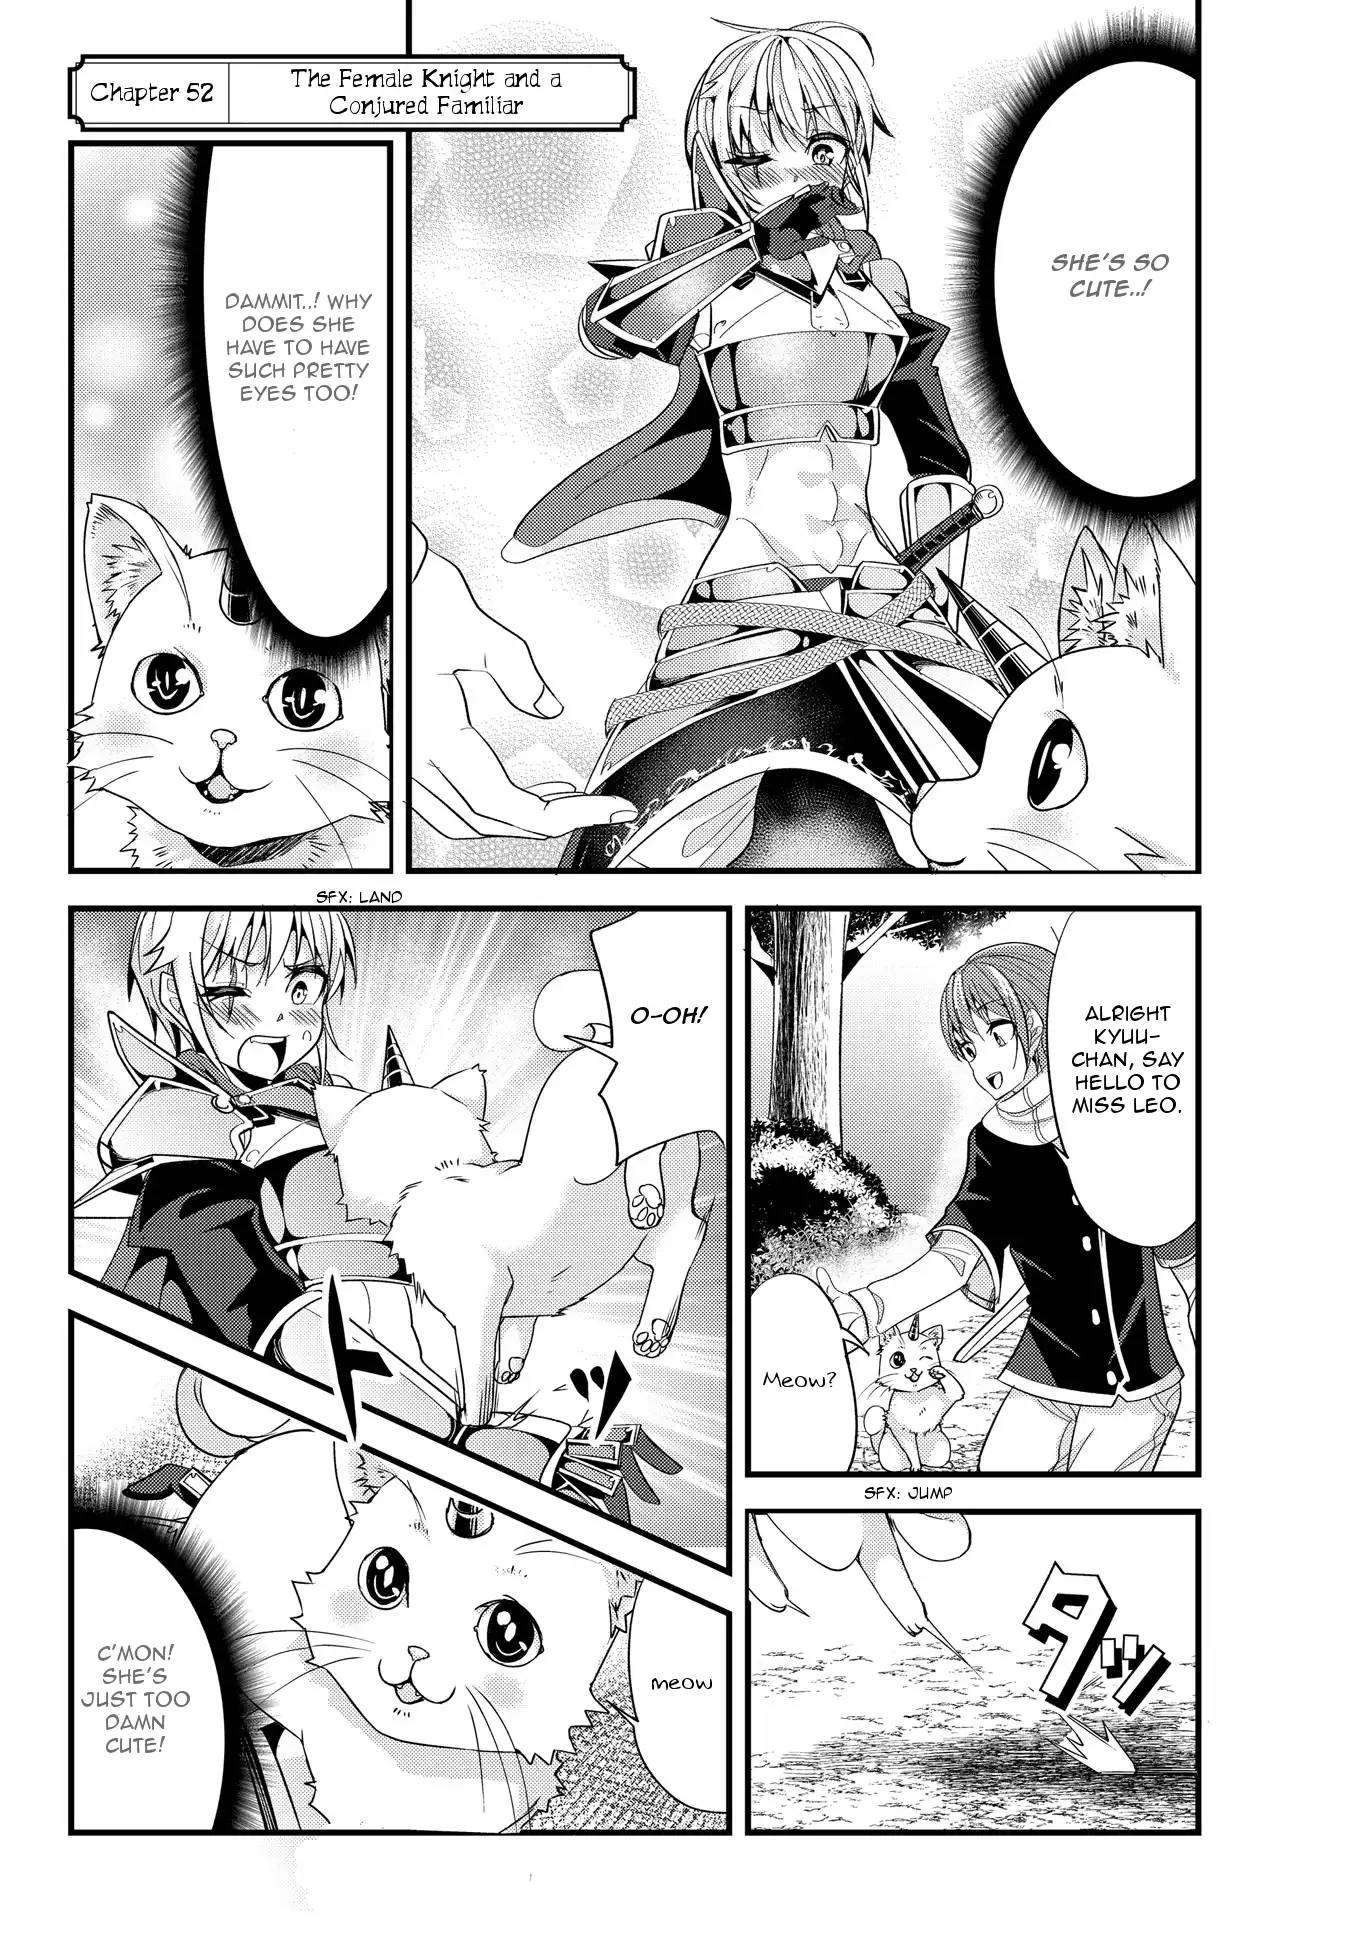 A Story About Treating a Female Knight, Who Has Never Been Treated as a Woman, as a Woman - Chapter 52 Page 2